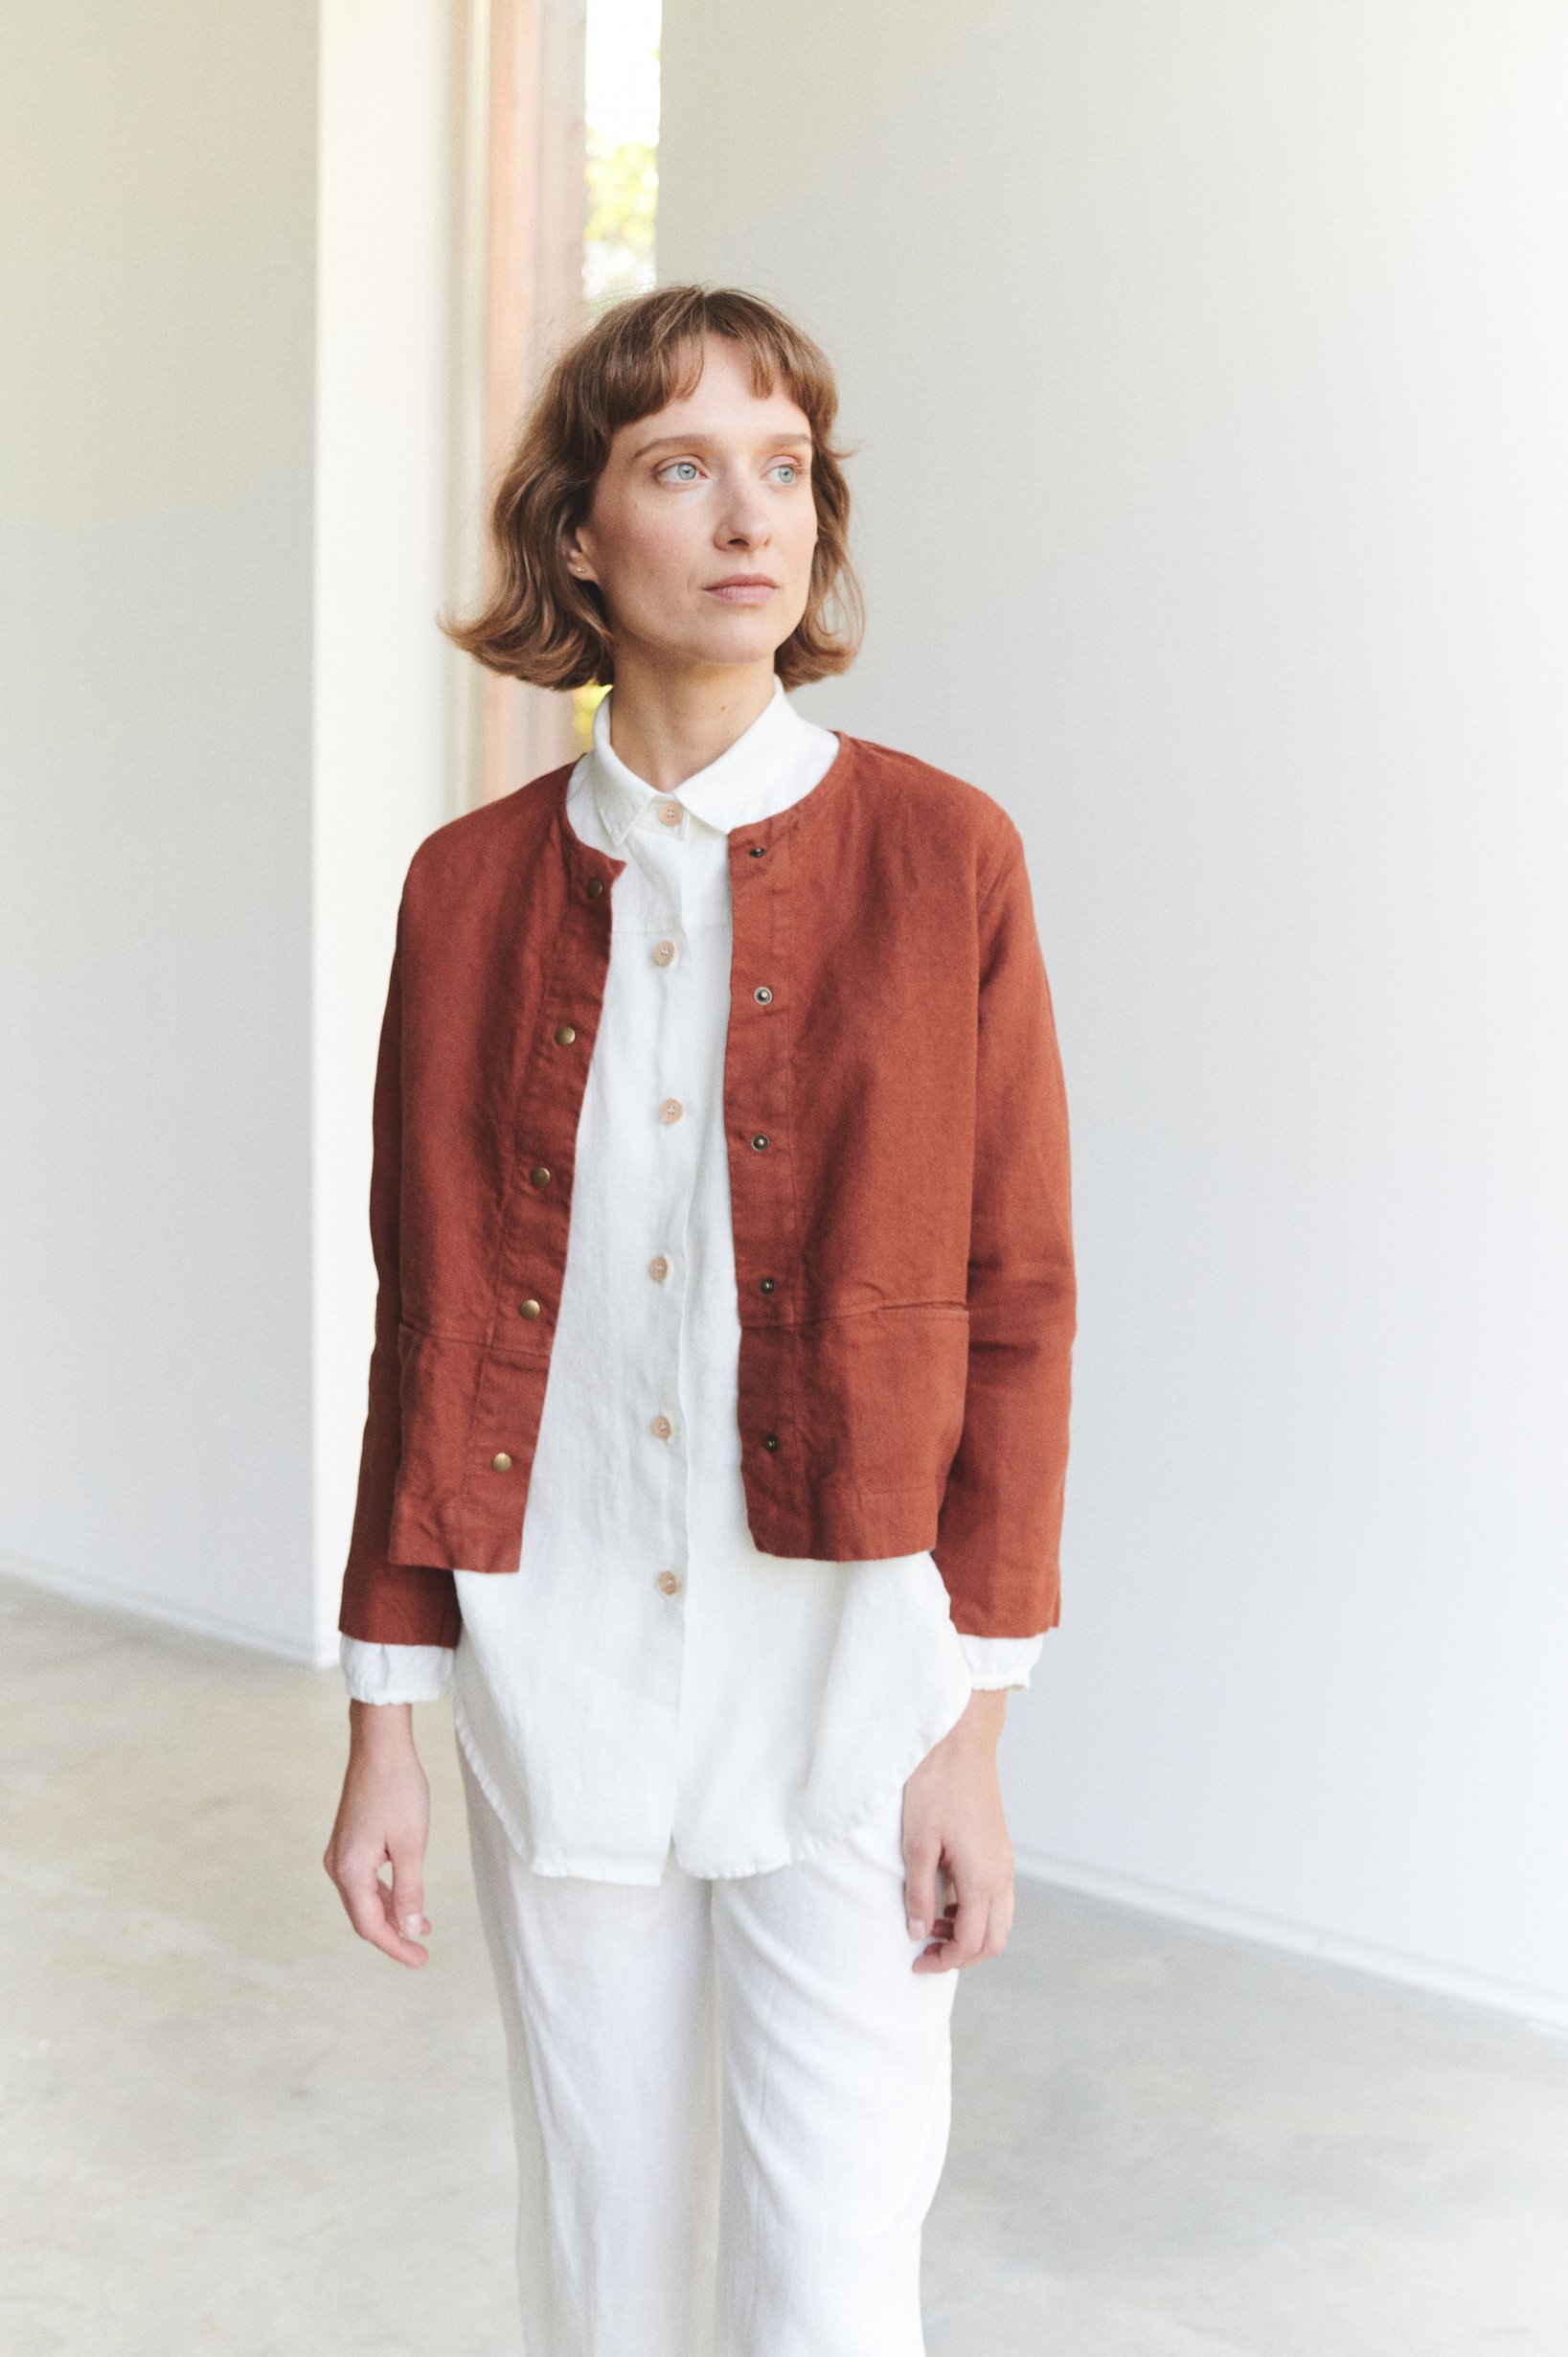 Linen jacket with snap button and pockets